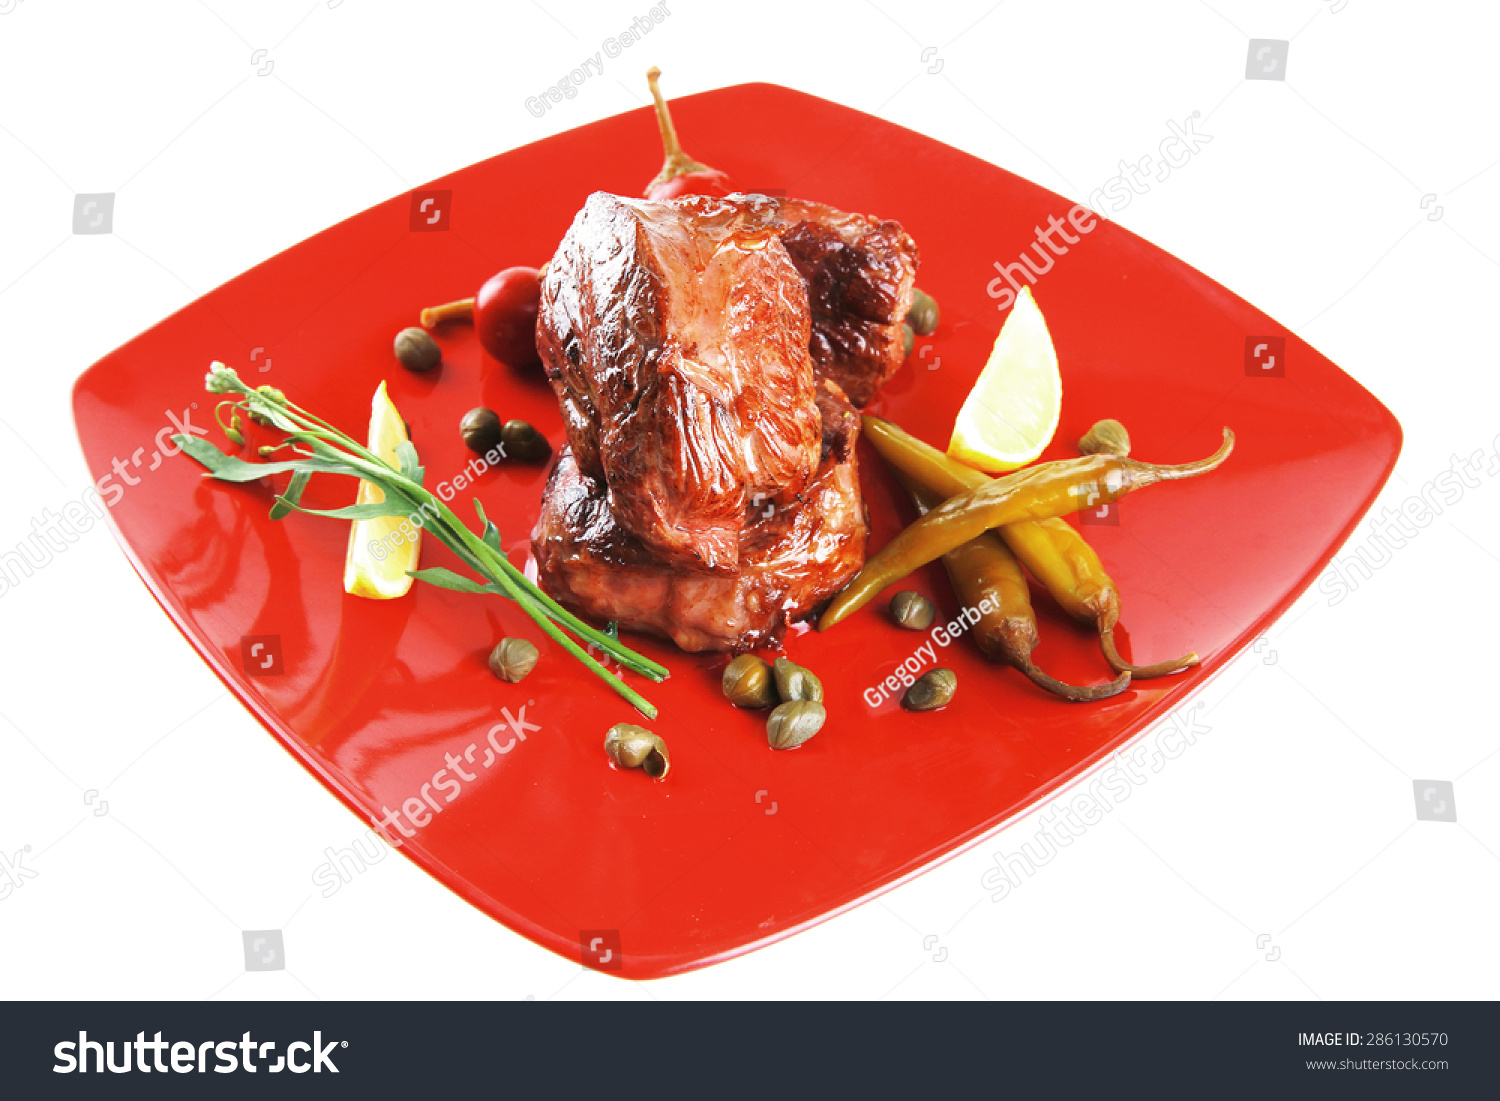 roast beef meat fillet medallion with cherry tomatoes and hot peppers on red plate isolated on white background #286130570